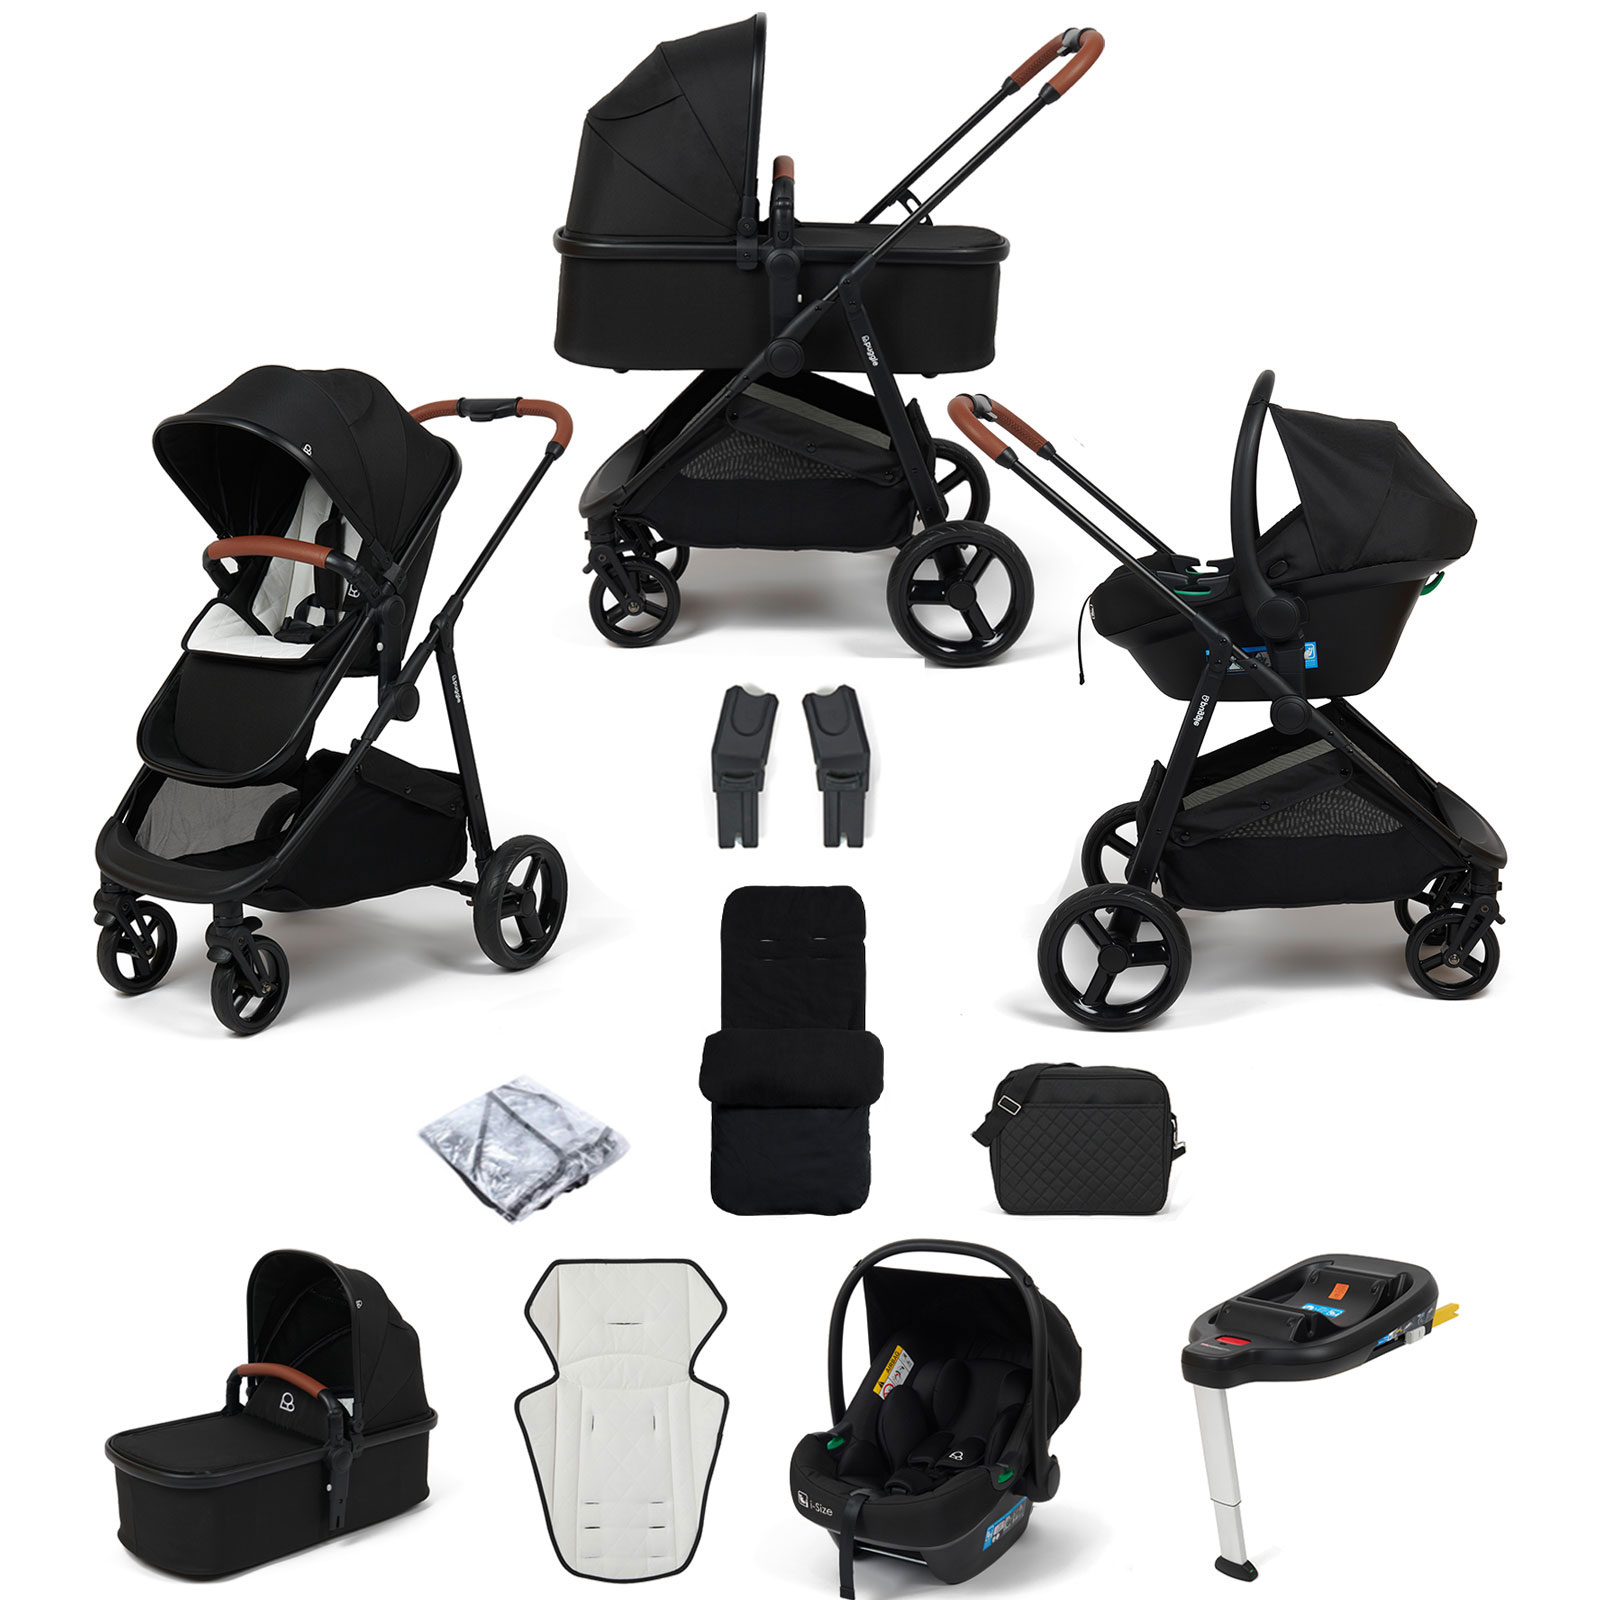 Puggle Monaco XT 3in1 i-Size Travel System with Changing Bag, Deluxe Footmuff & ISOFIX Base - Storm Black